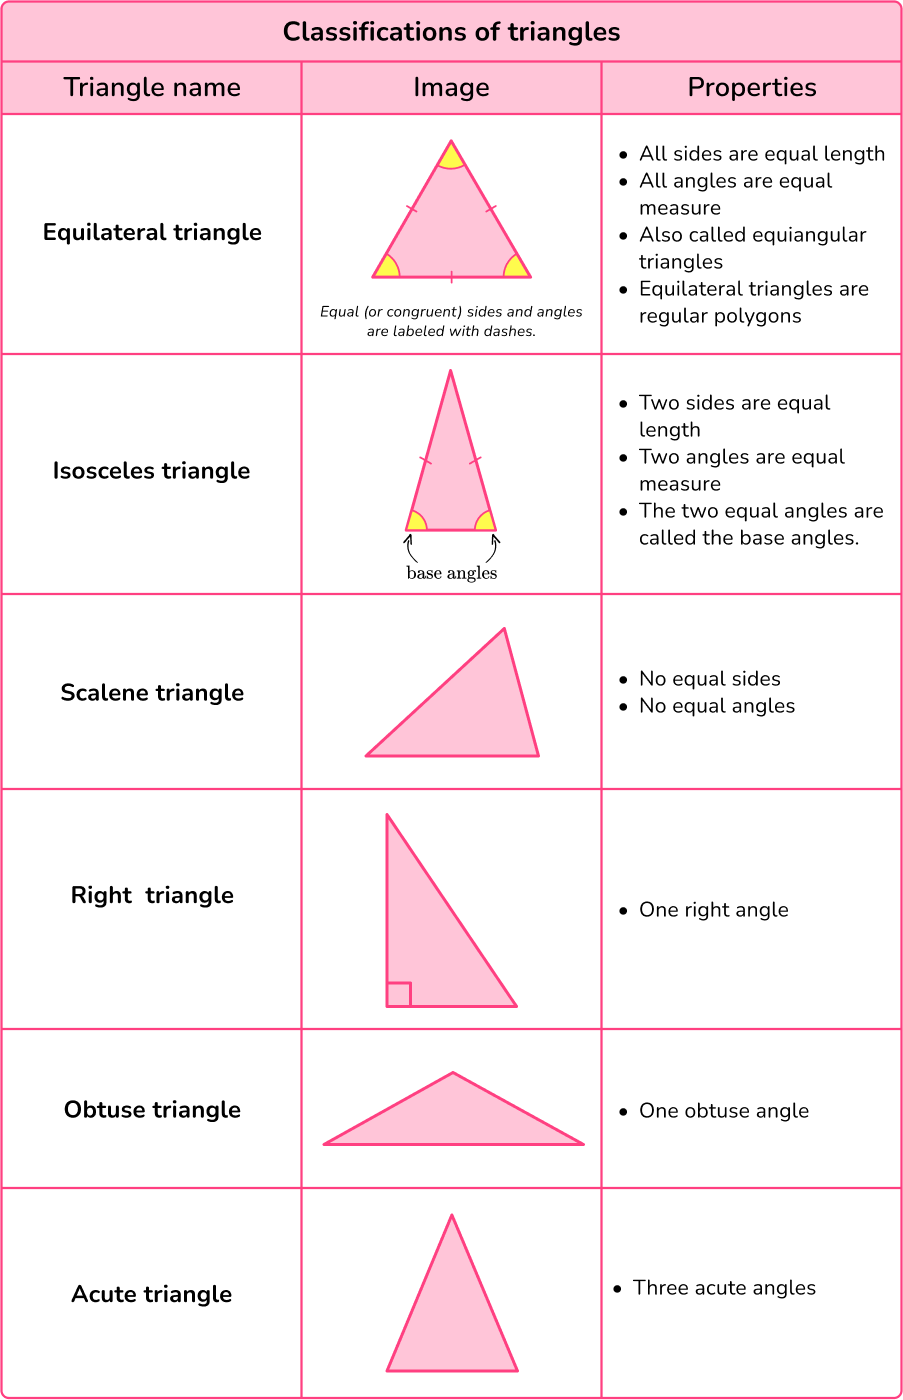 Types of Triangles image 1.1 US